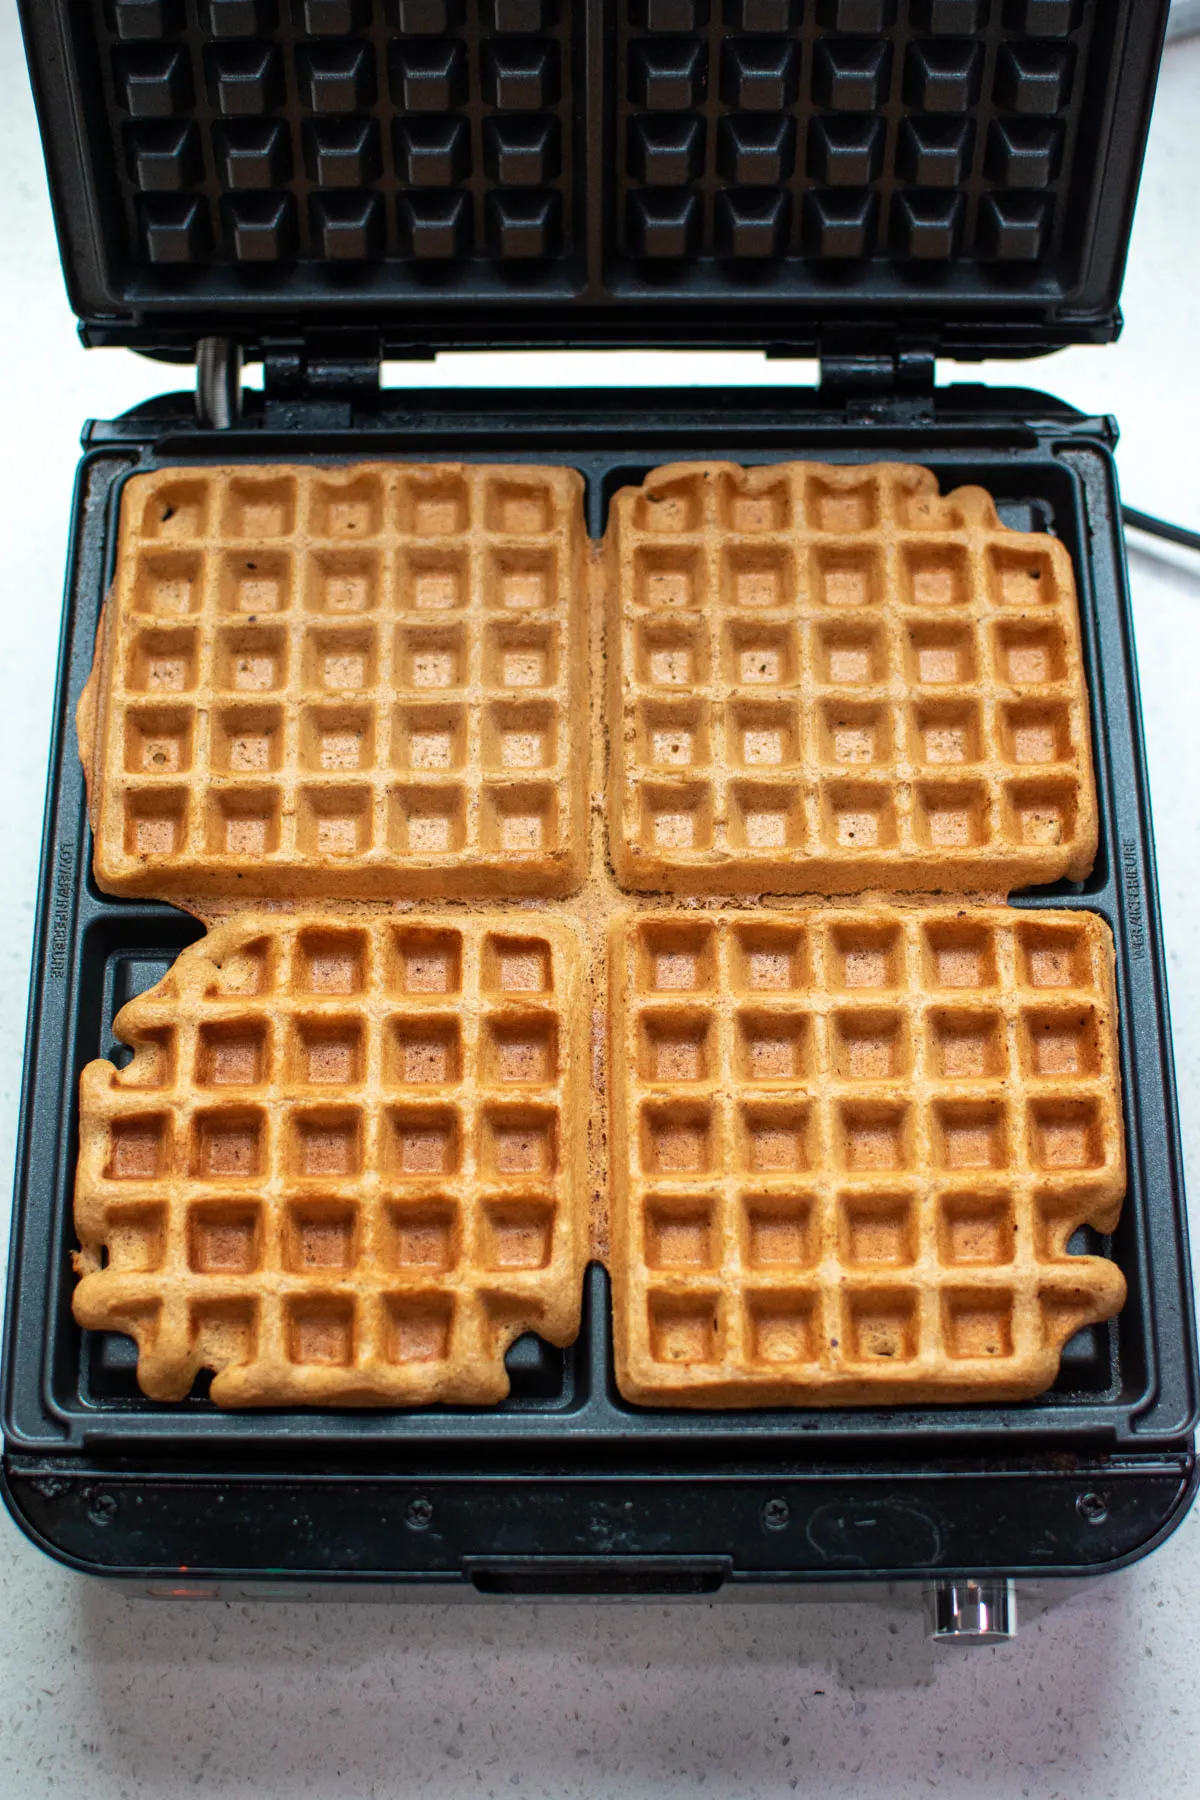 Square waffle iron with 4 cooked gingerbread waffles.